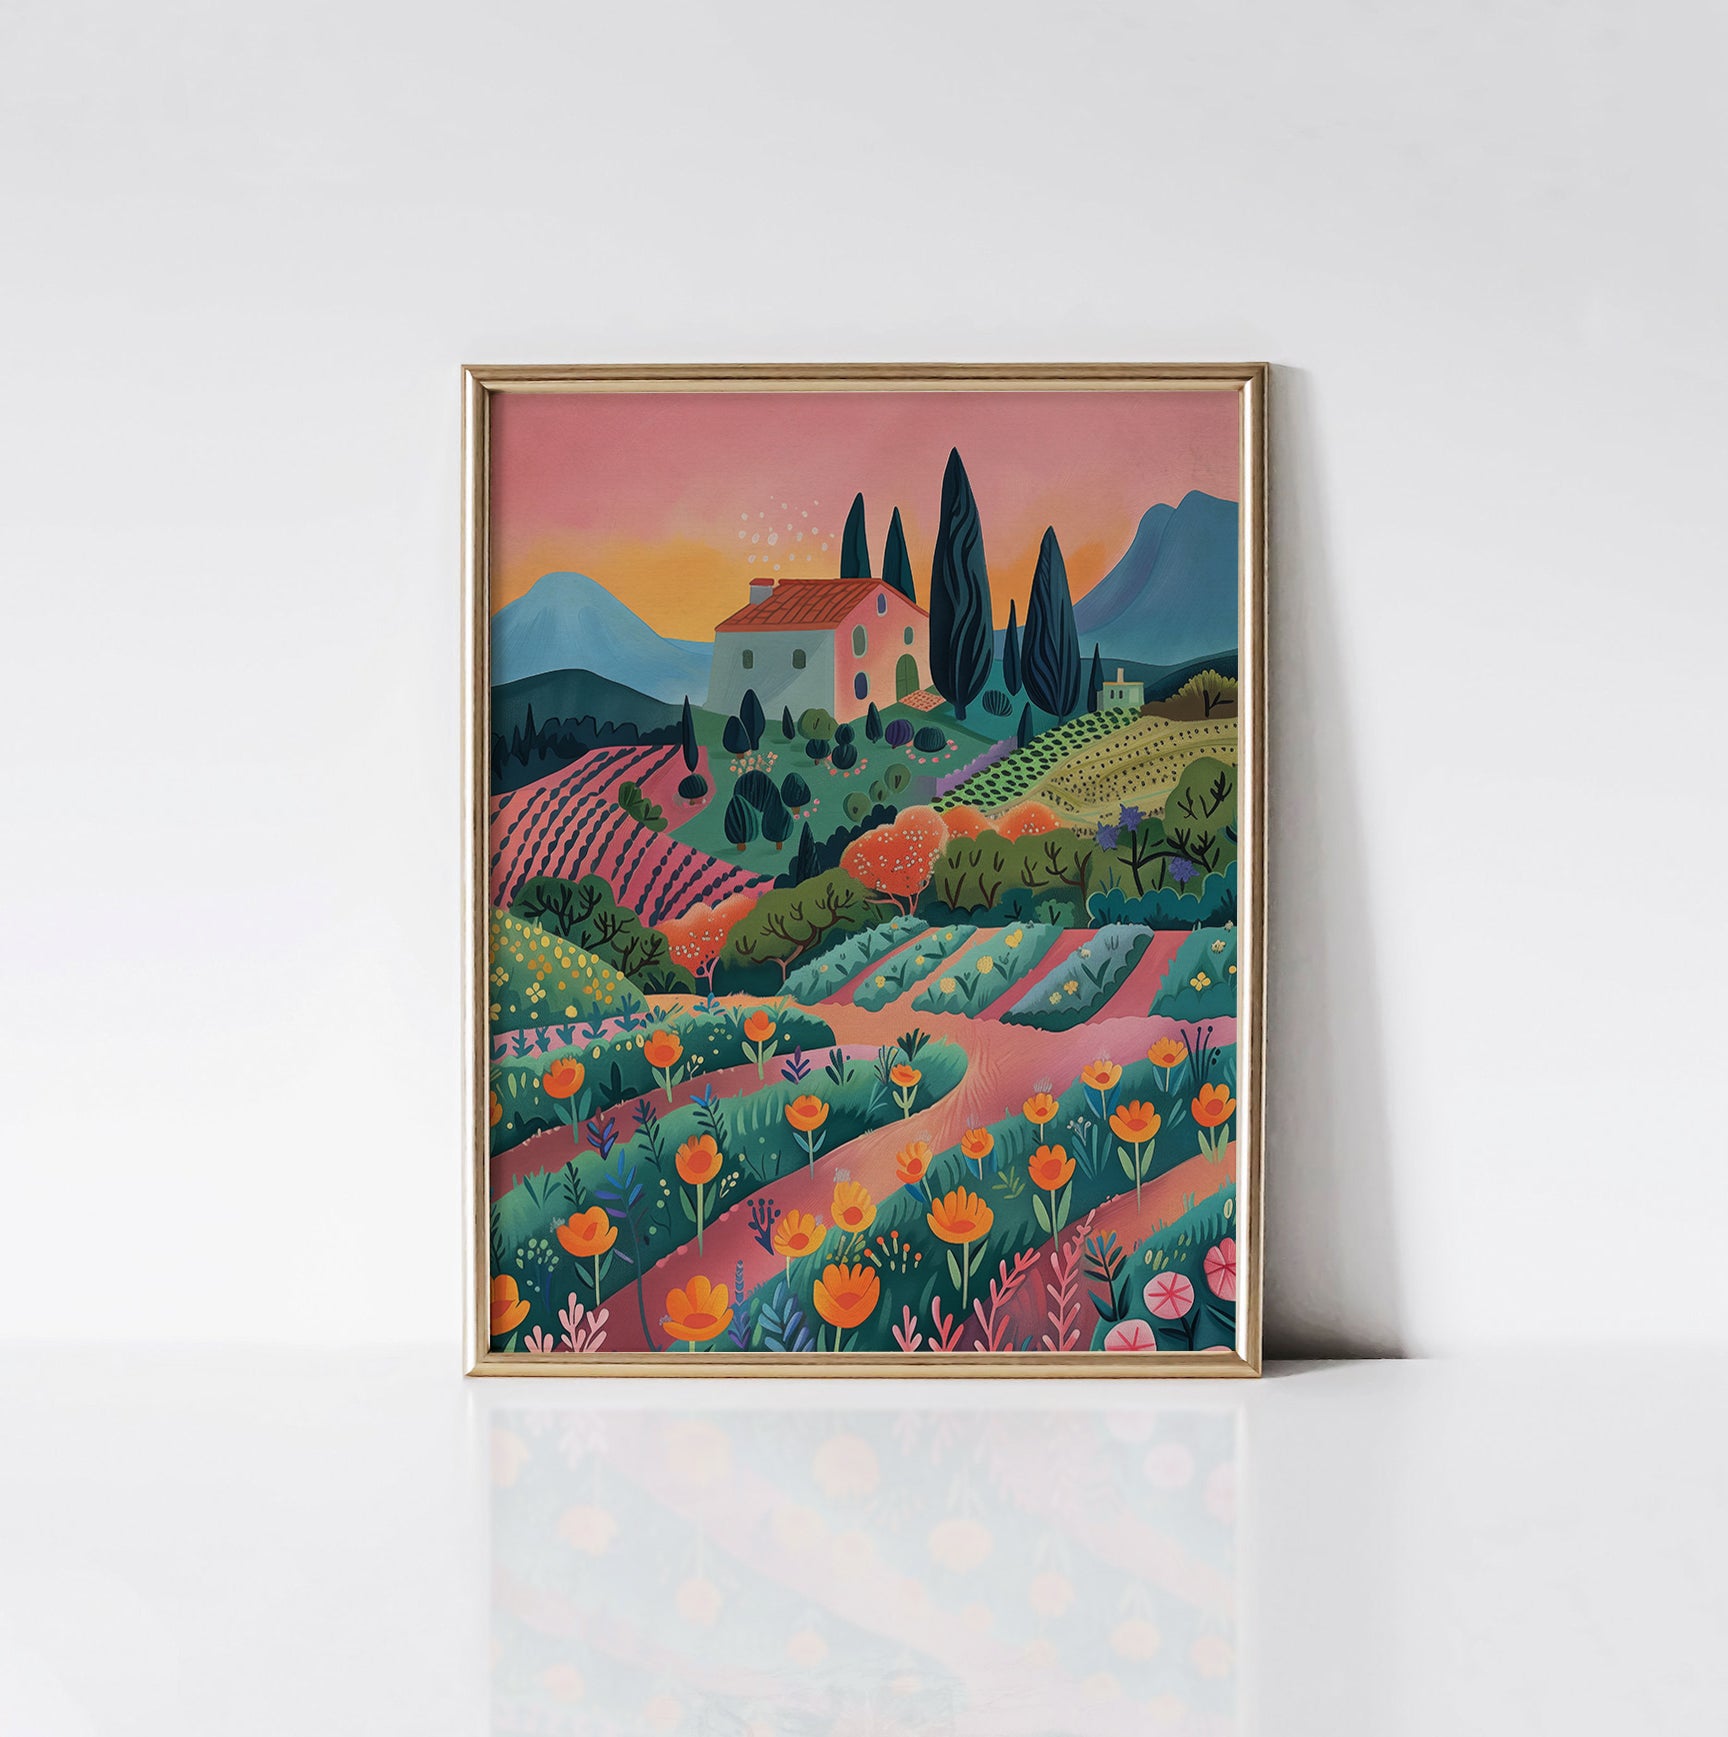 Sunset Vineyard art print displayed in a sleek gold frame, featuring a picturesque vineyard at sunset with colorful flowers and a quaint farmhouse